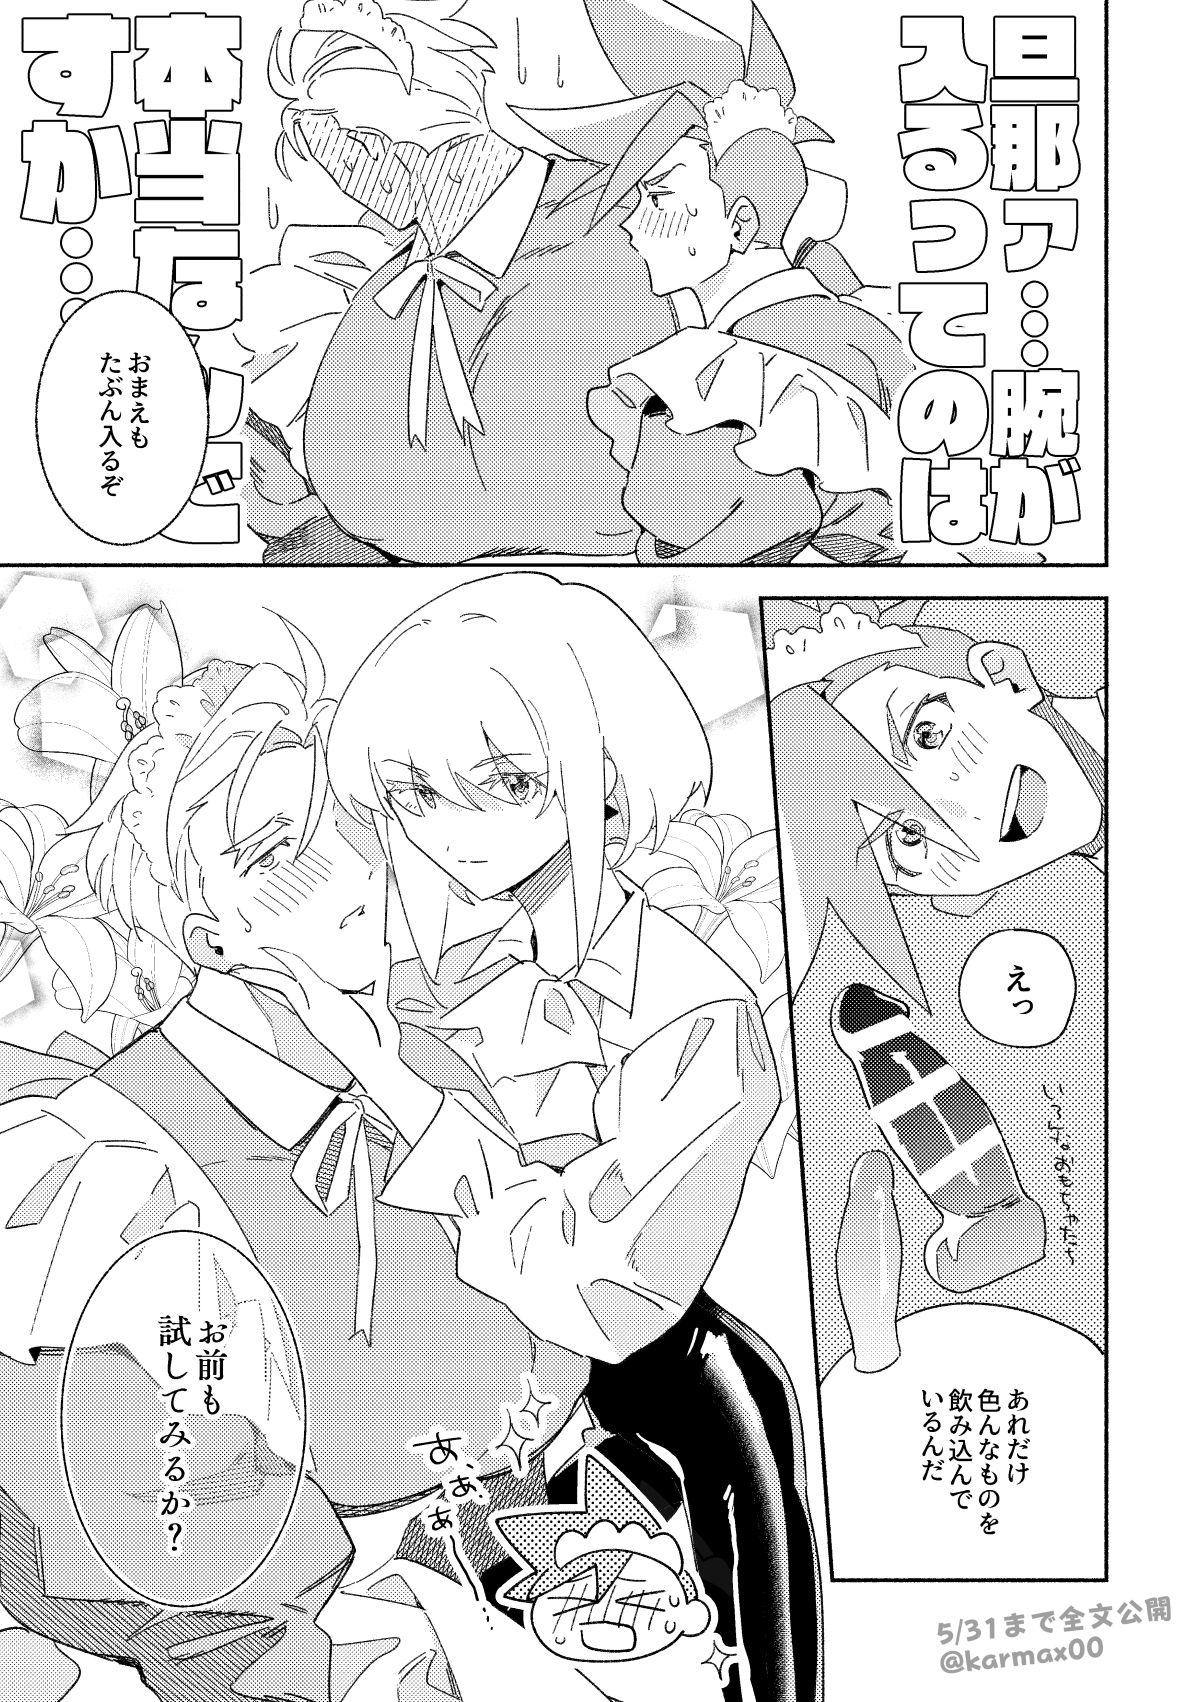 Old Young Goshujin-sama no Otawamure - Promare Belly - Page 10